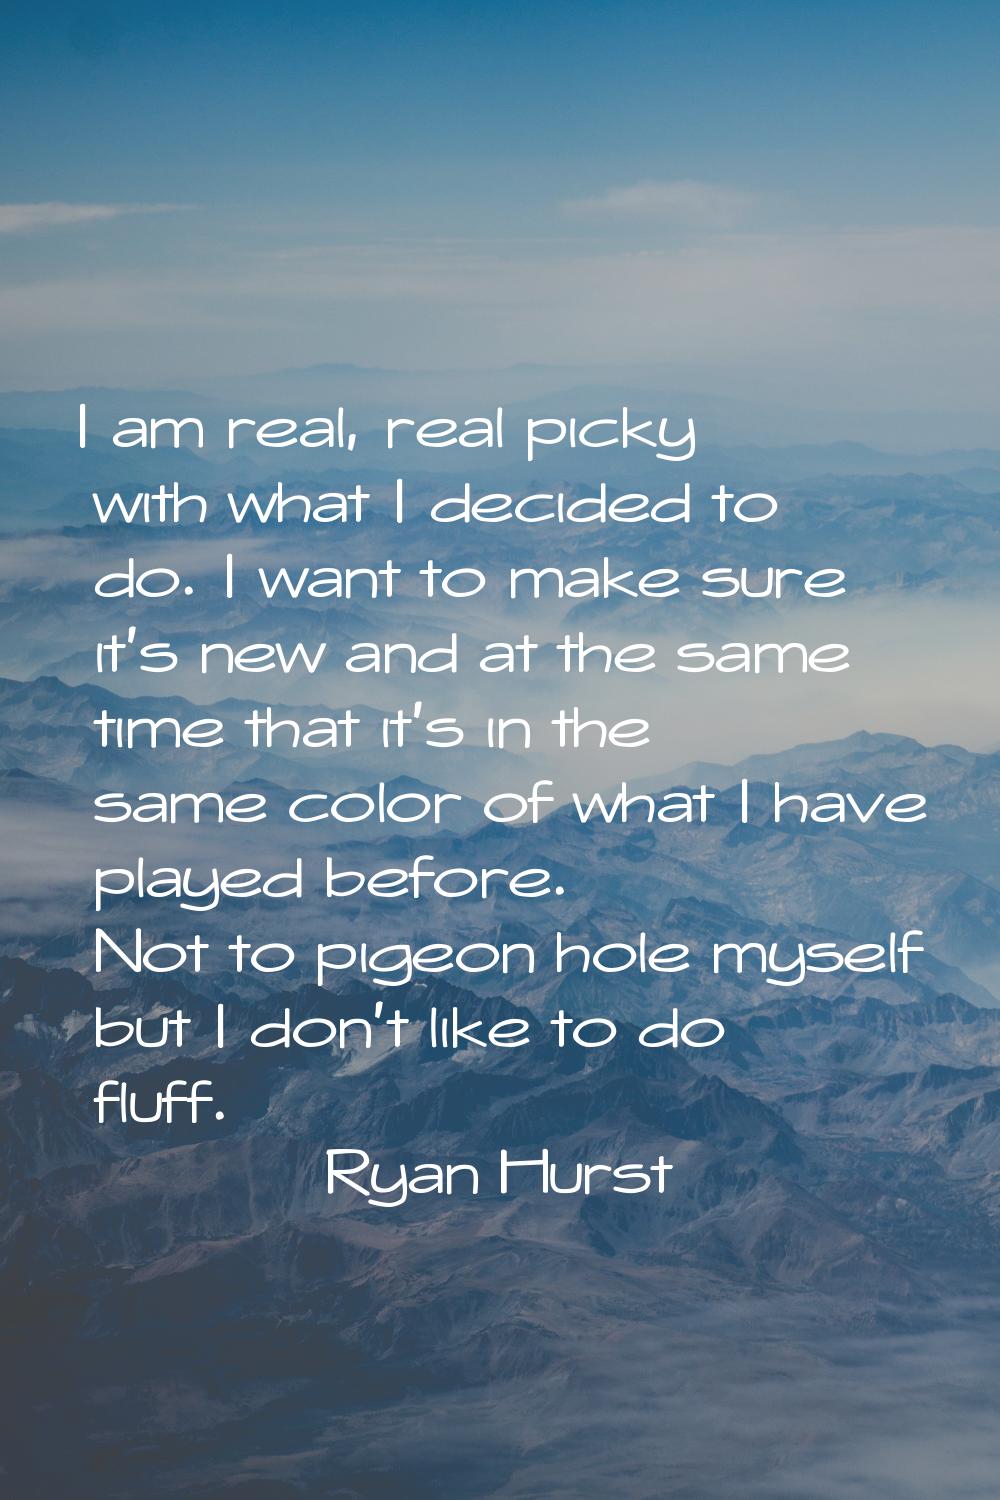 I am real, real picky with what I decided to do. I want to make sure it's new and at the same time 